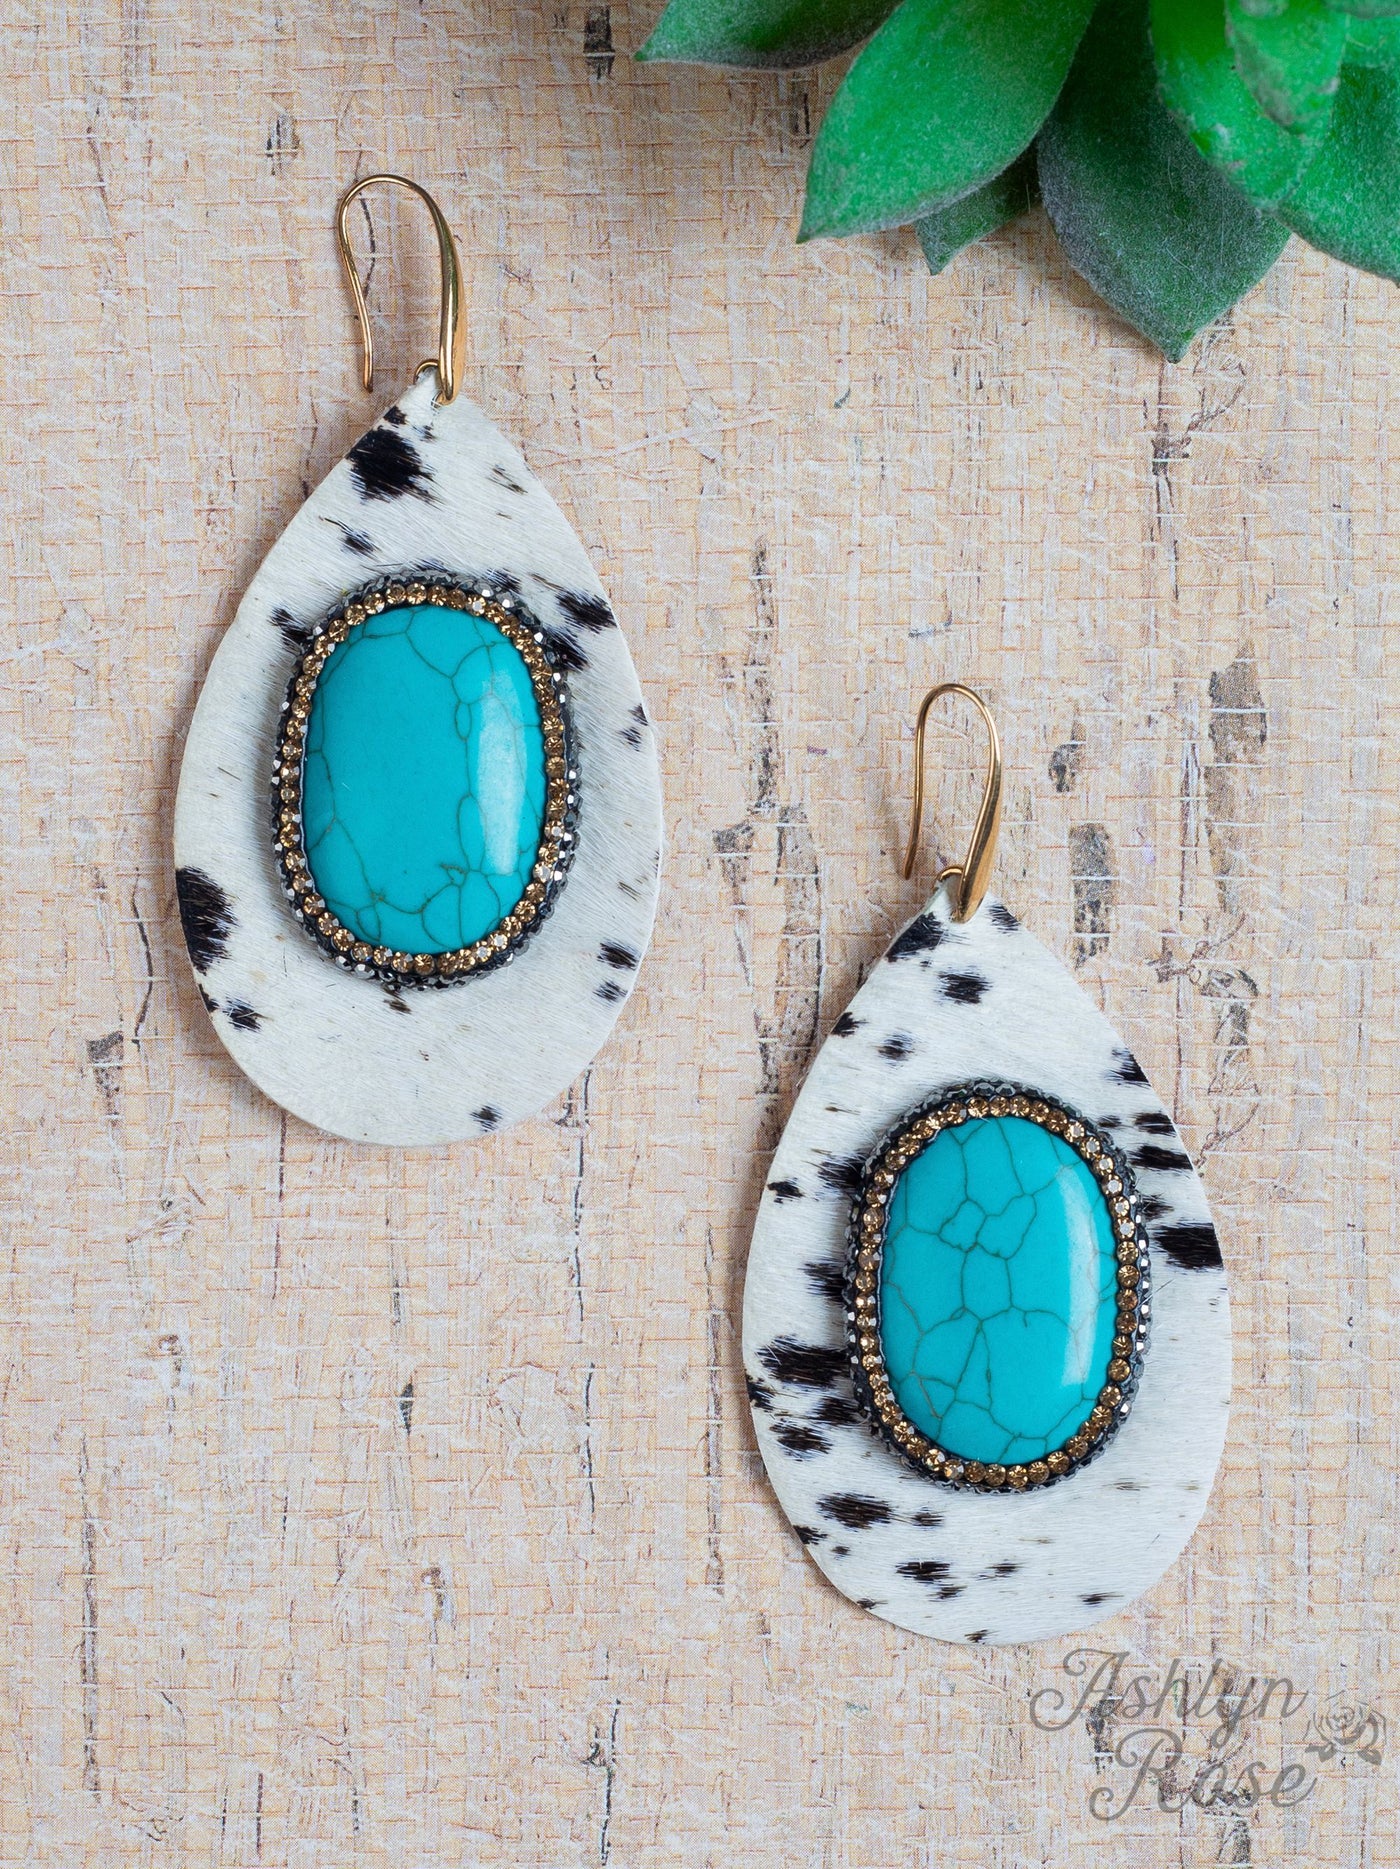 Chasing You Teardrop Cowhide Earrings with Turquoise Stone, White